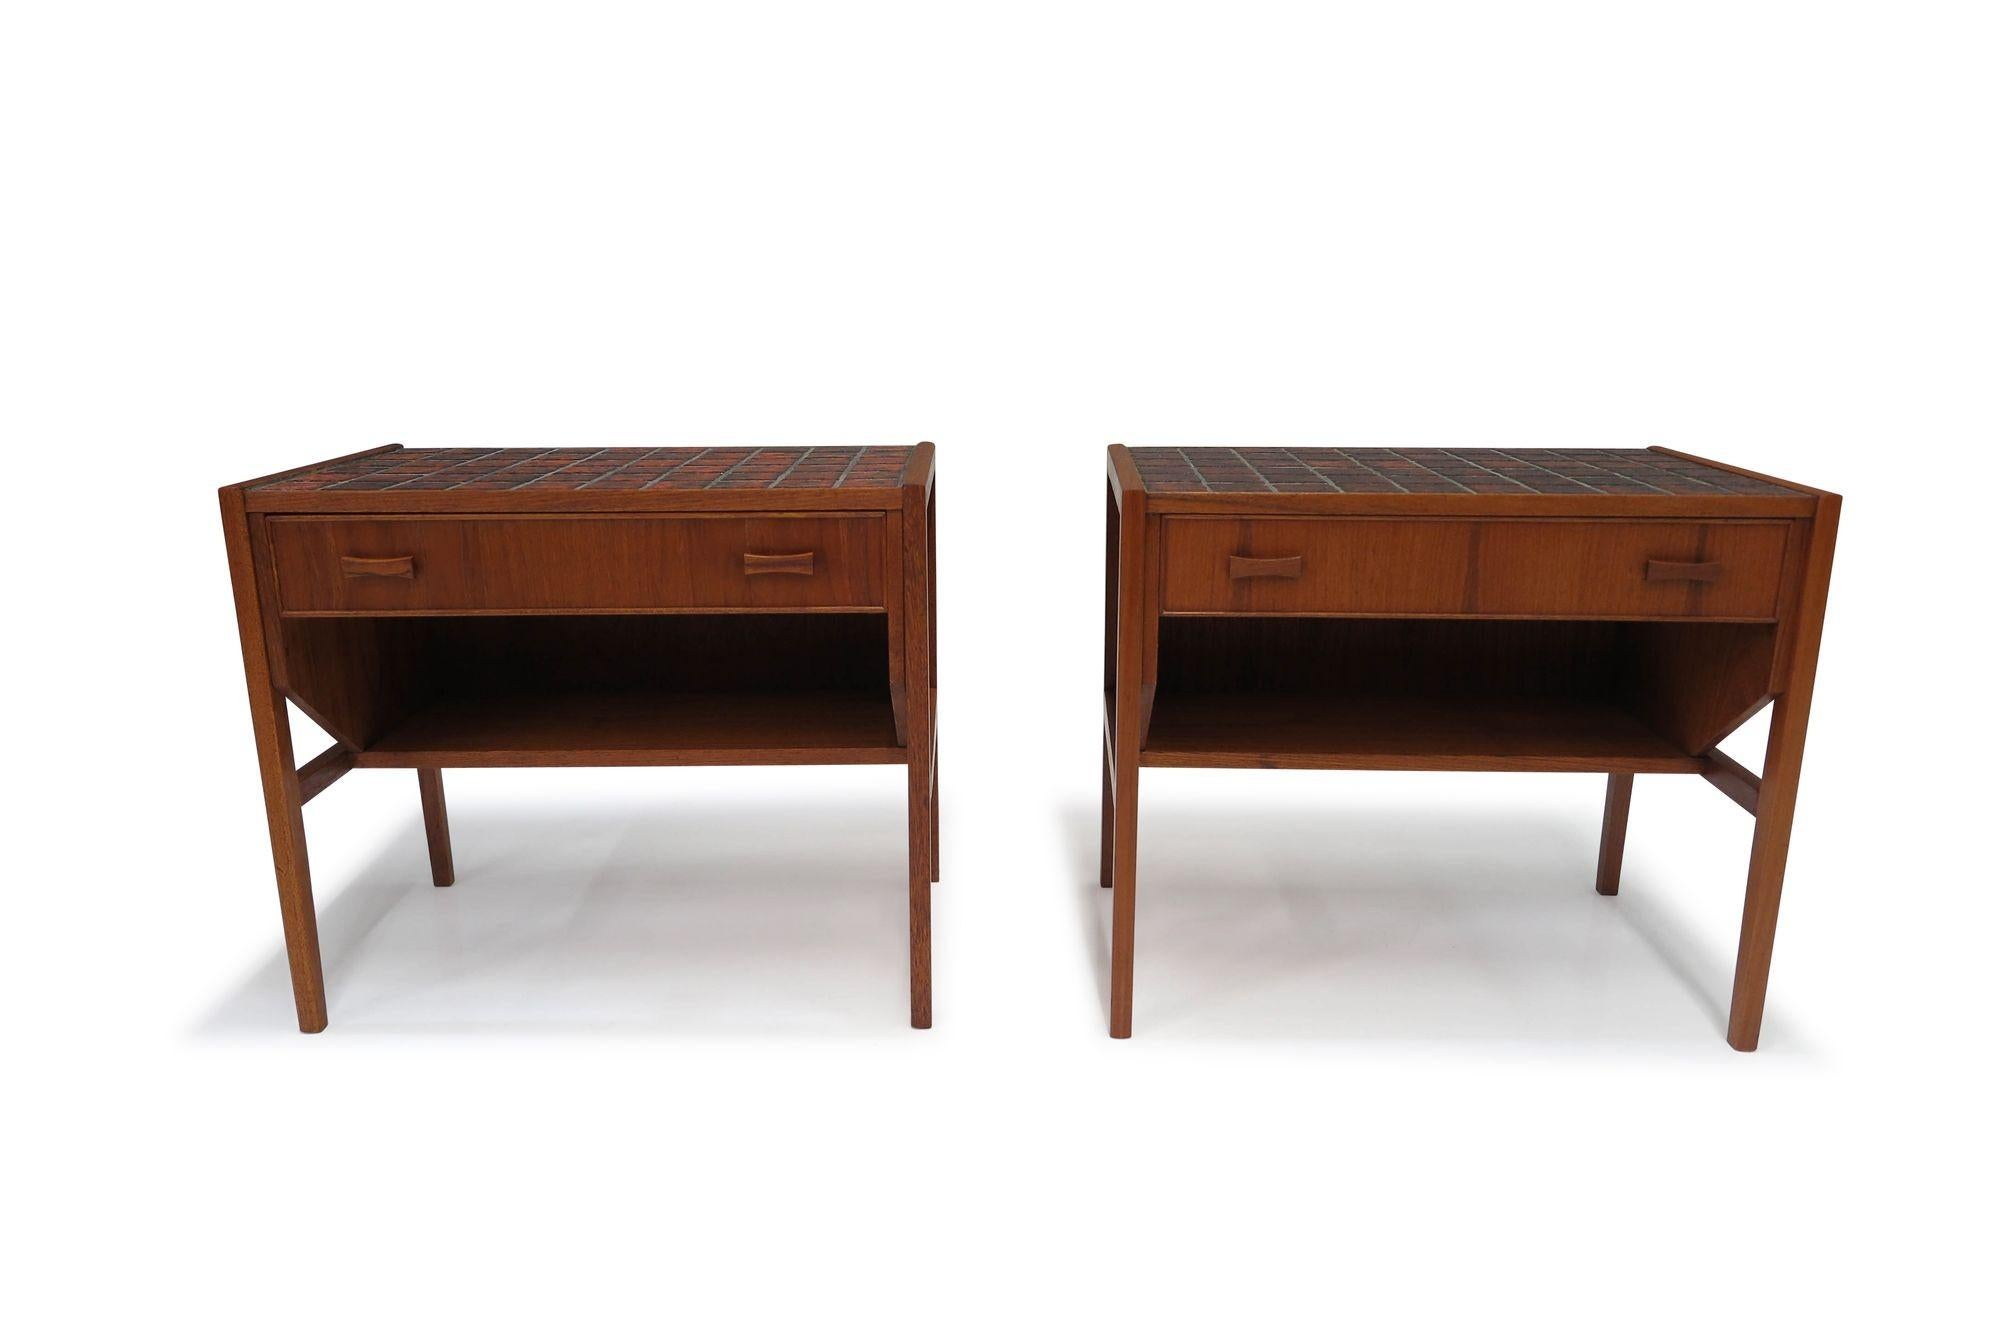 Pair of Scandinavian cabinets crafted from teak, featuring an orange ceramic tile top surface. Each cabinet has one drawer over an open storage space, raised on squared legs. The nightstands have been fully restored and are in good condition,